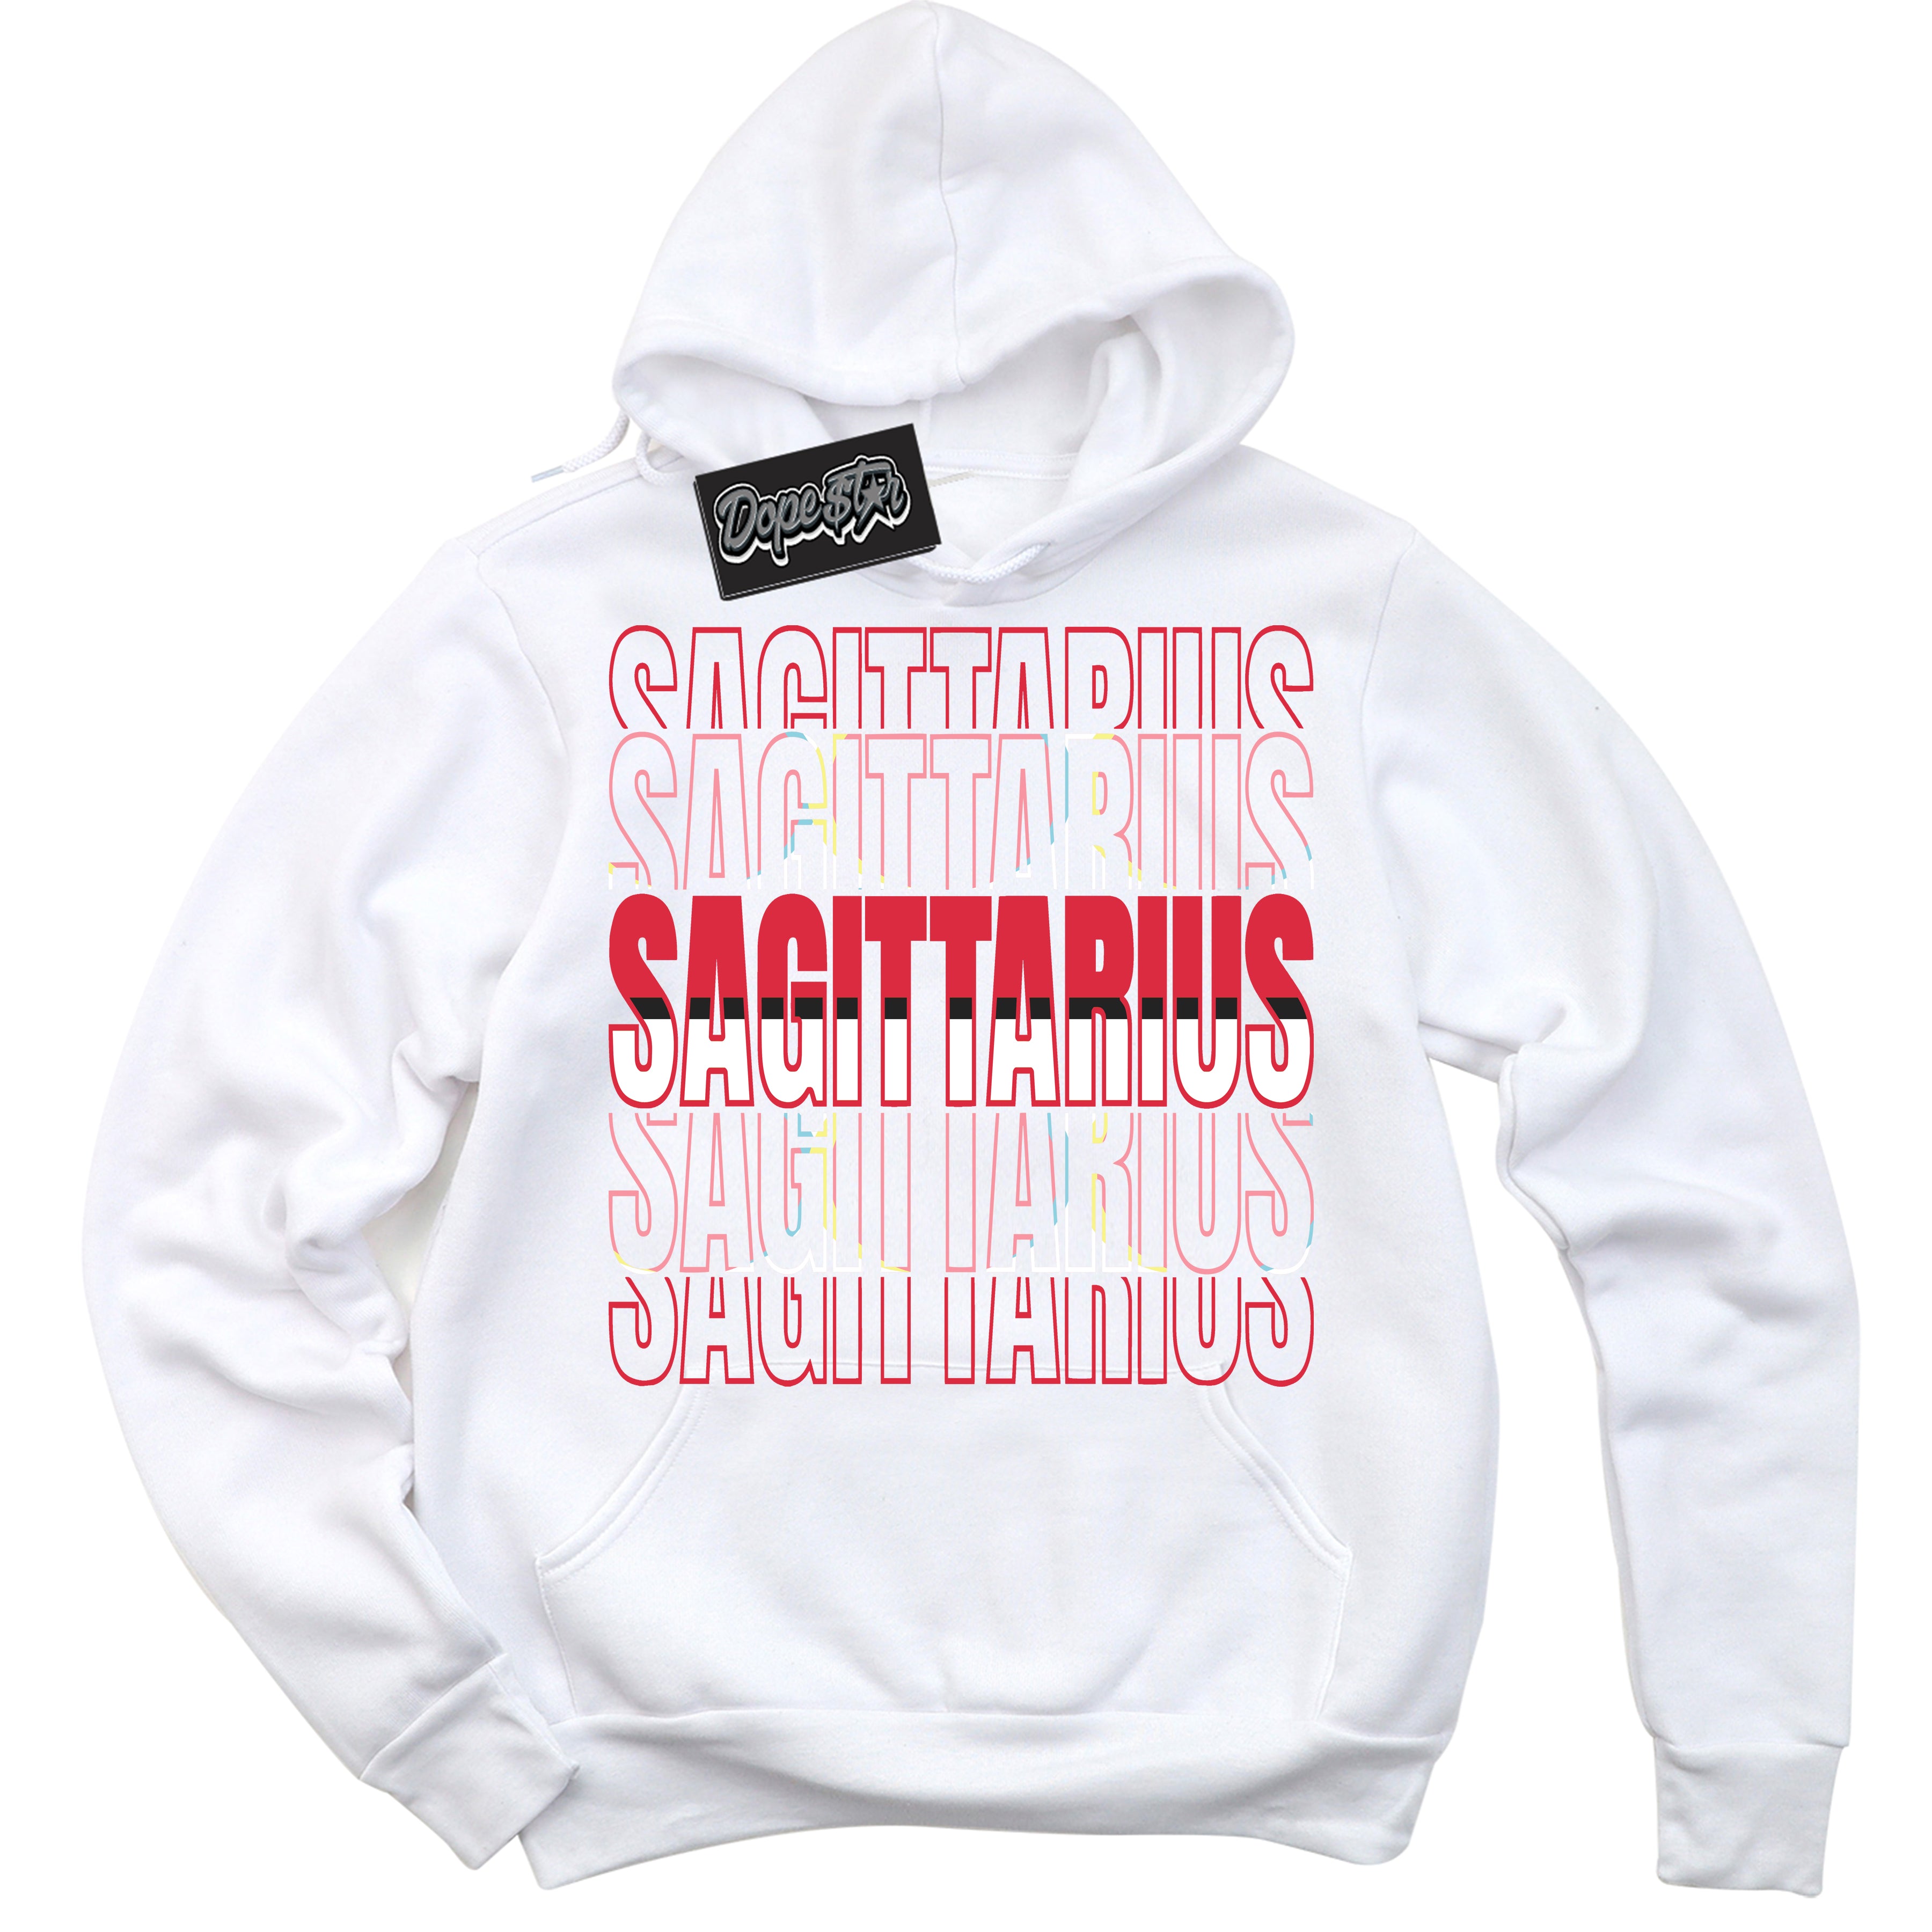 Cool White Graphic DopeStar Hoodie with “ Sagittarius “ print, that perfectly matches Spider-Verse 1s sneakers